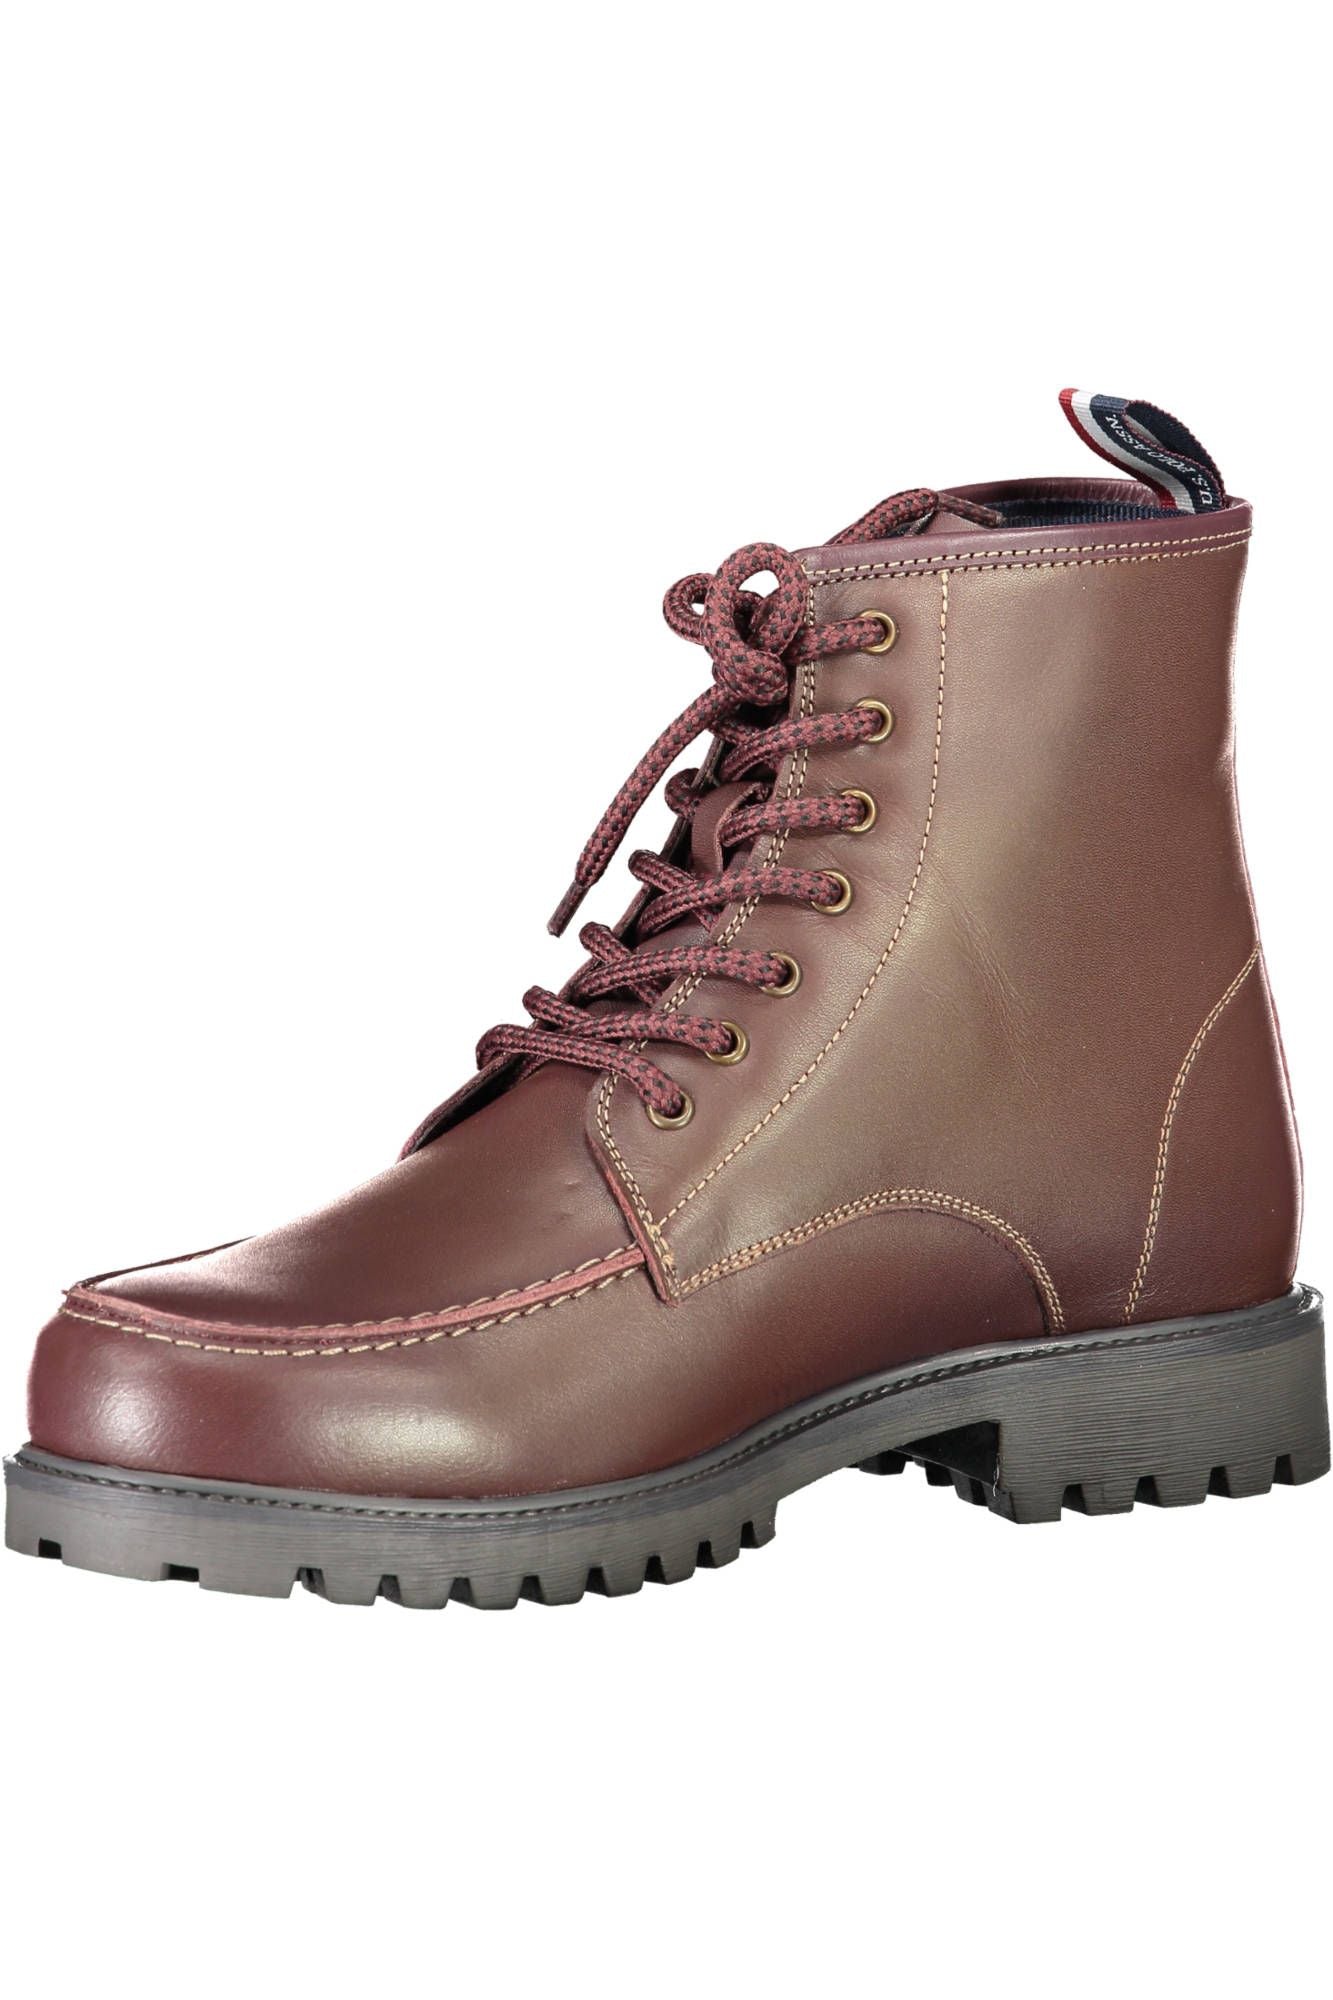 U.S. Polo Assn. Pink Leather Boot